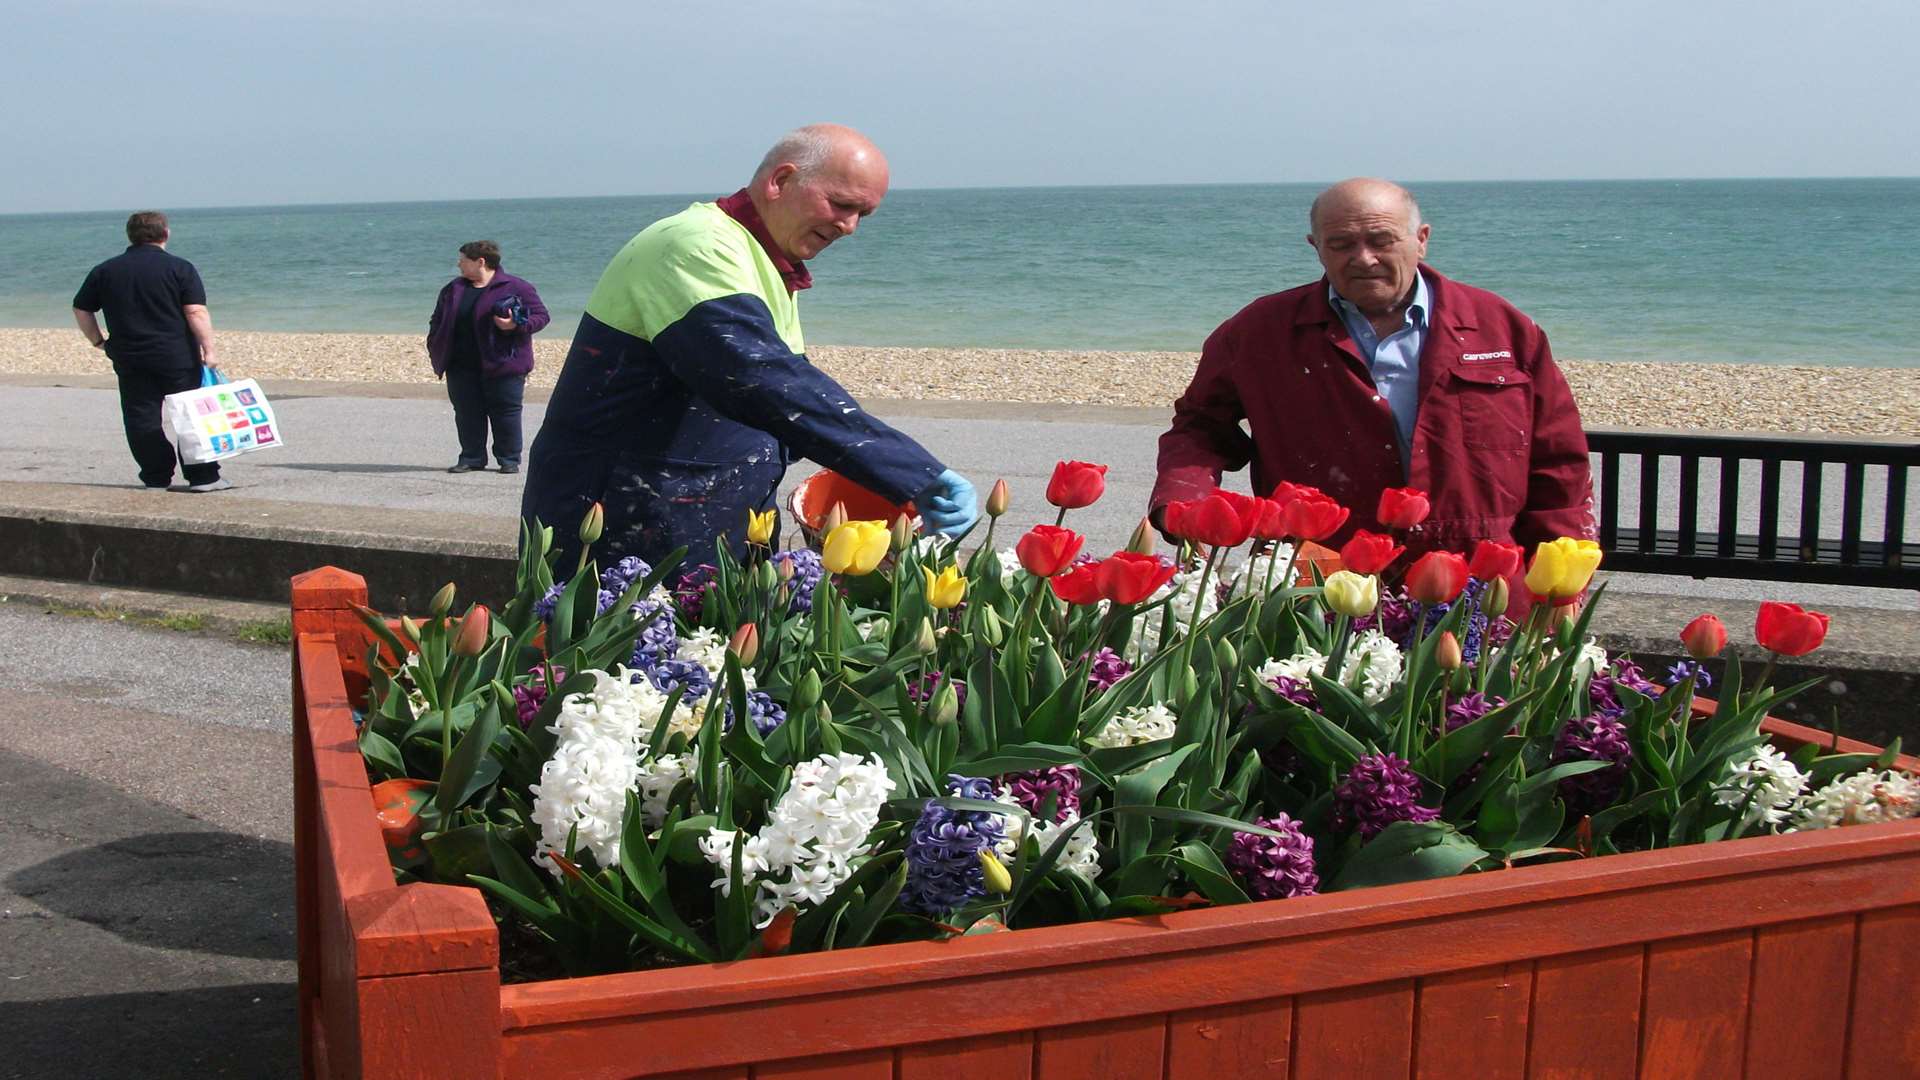 Councillors Adrian Friend and Wayne Elliot help maintain the planters on Deal sea front